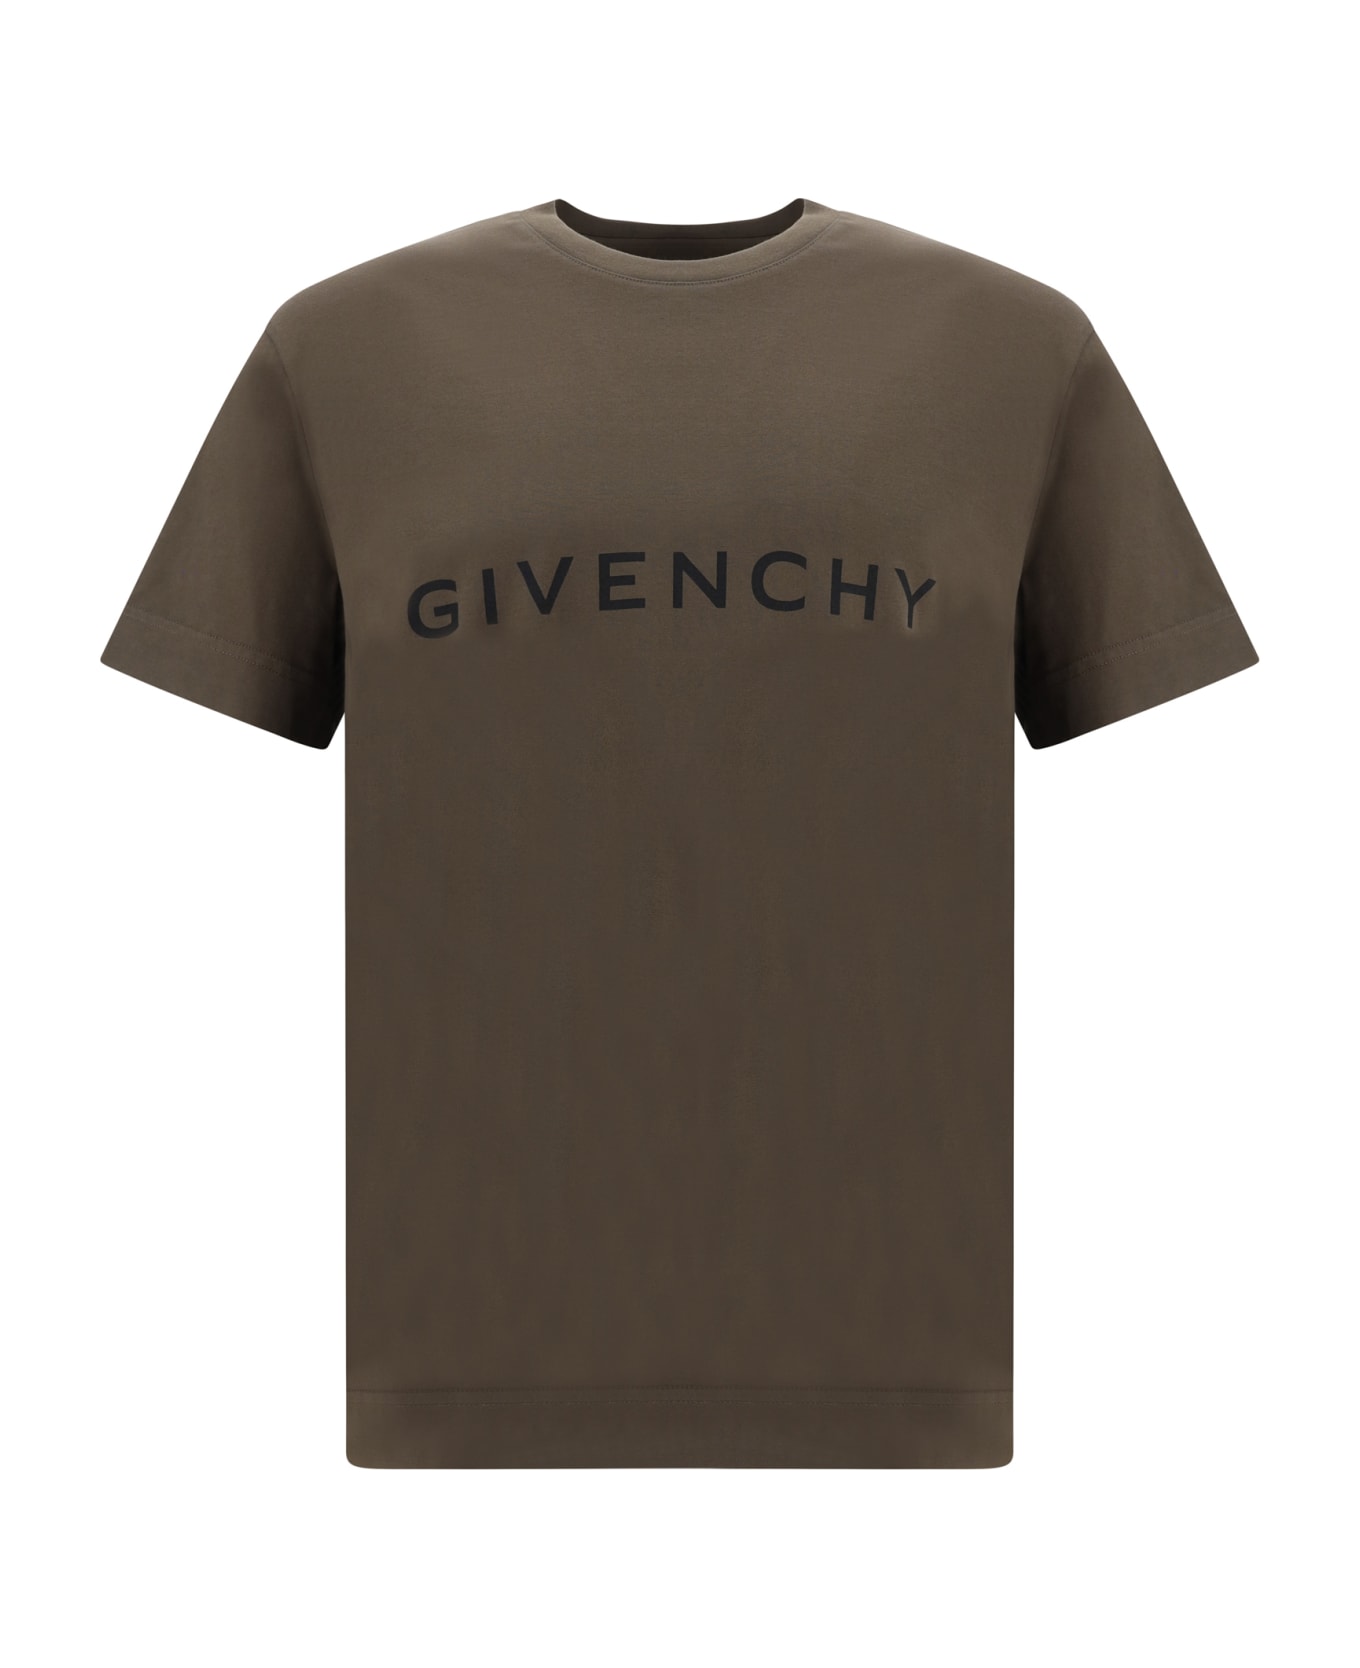 Givenchy fabric T-shirt With Contrasting Lettering In Cotton Man - Khaki